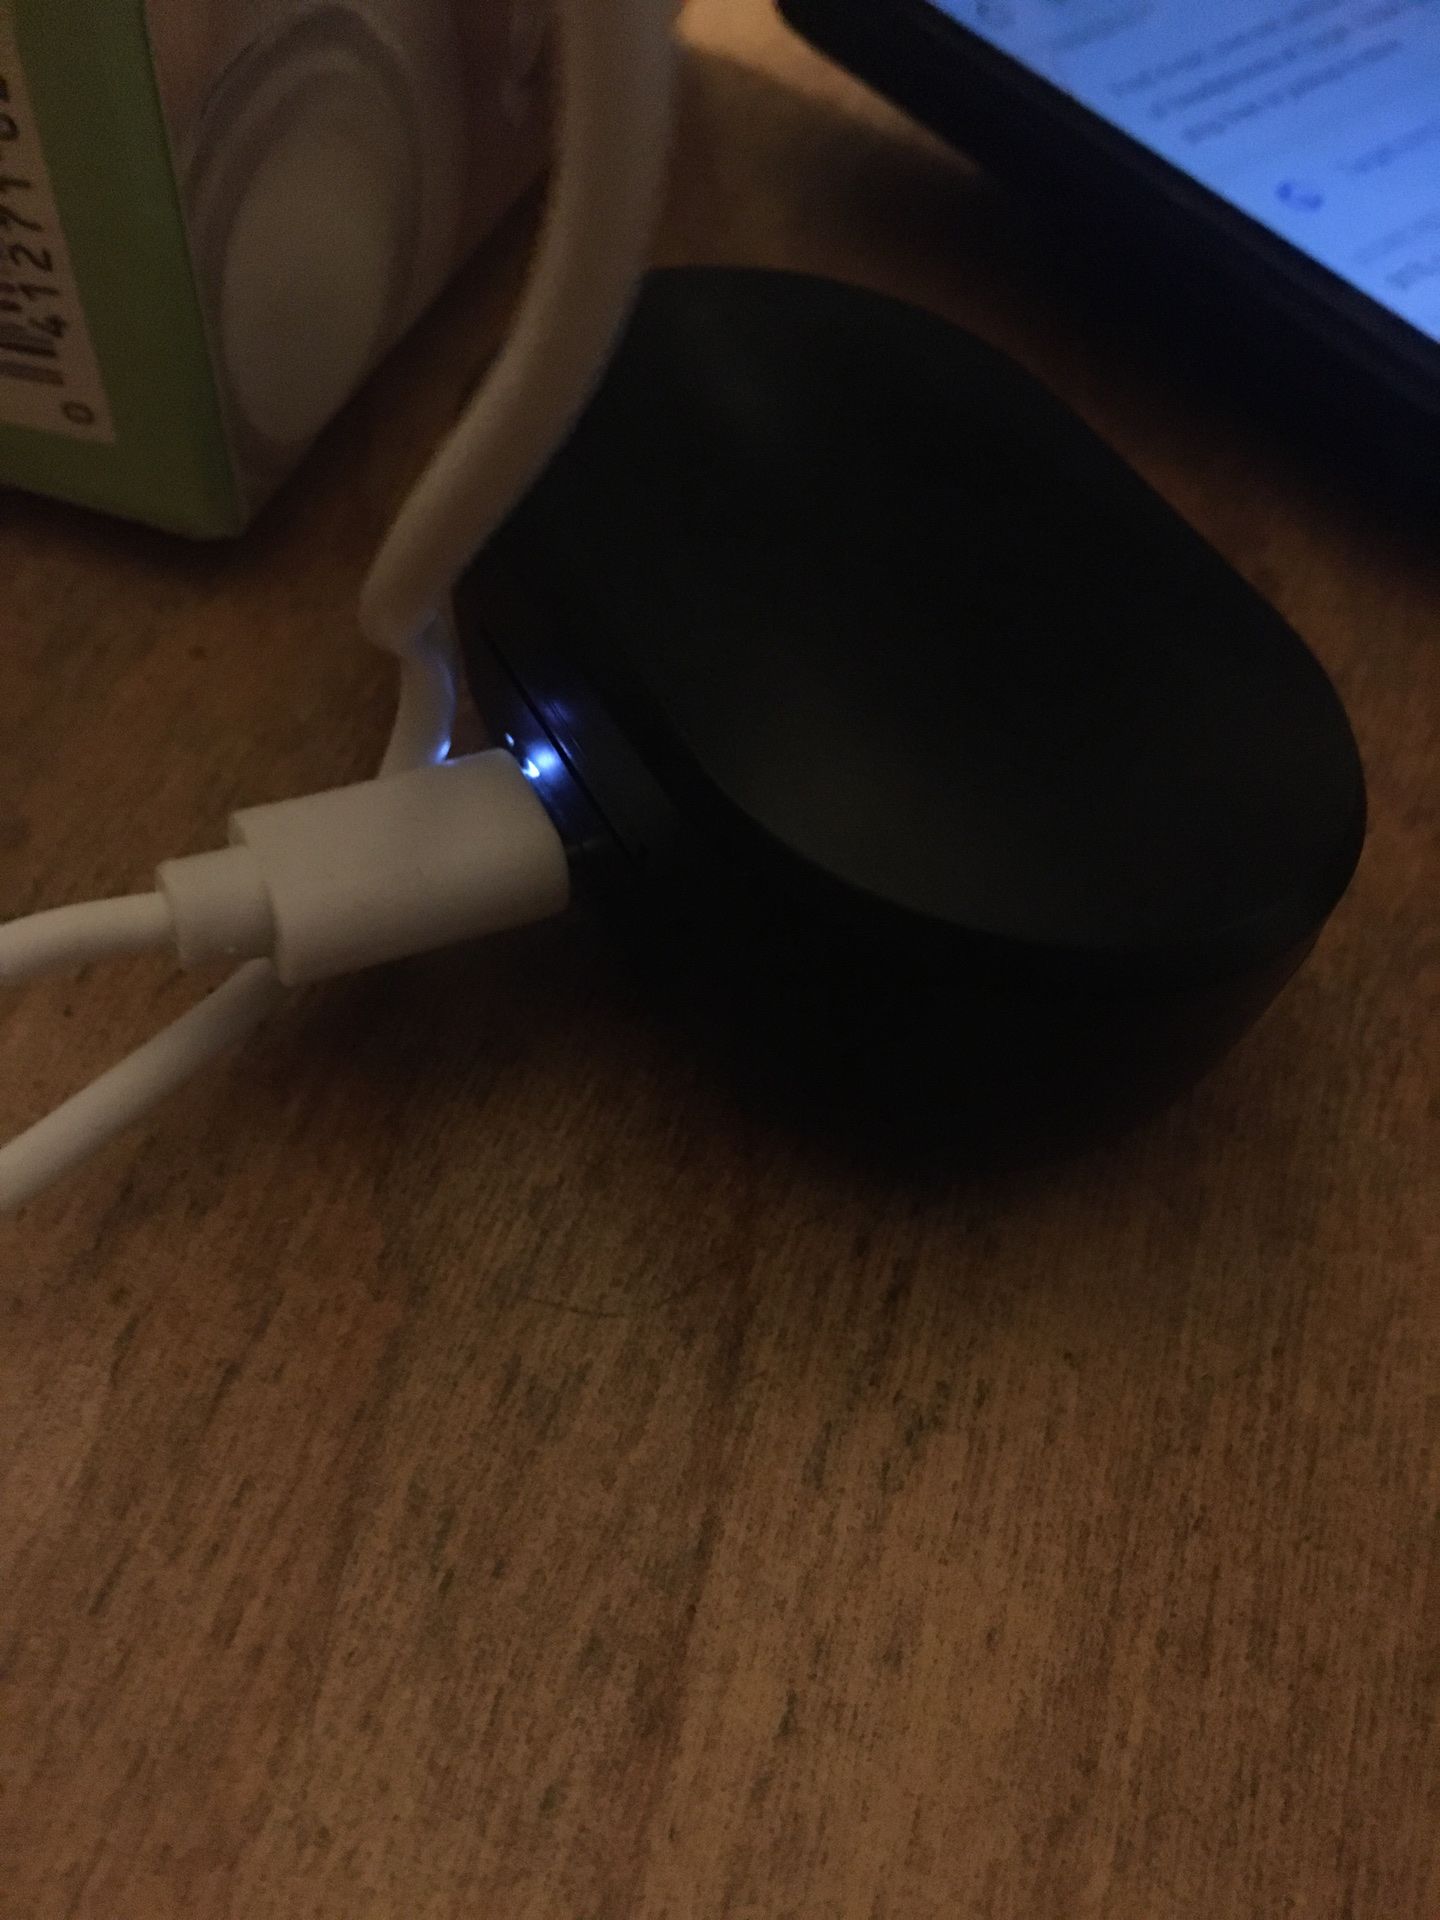 Wireless earbuds and charger case